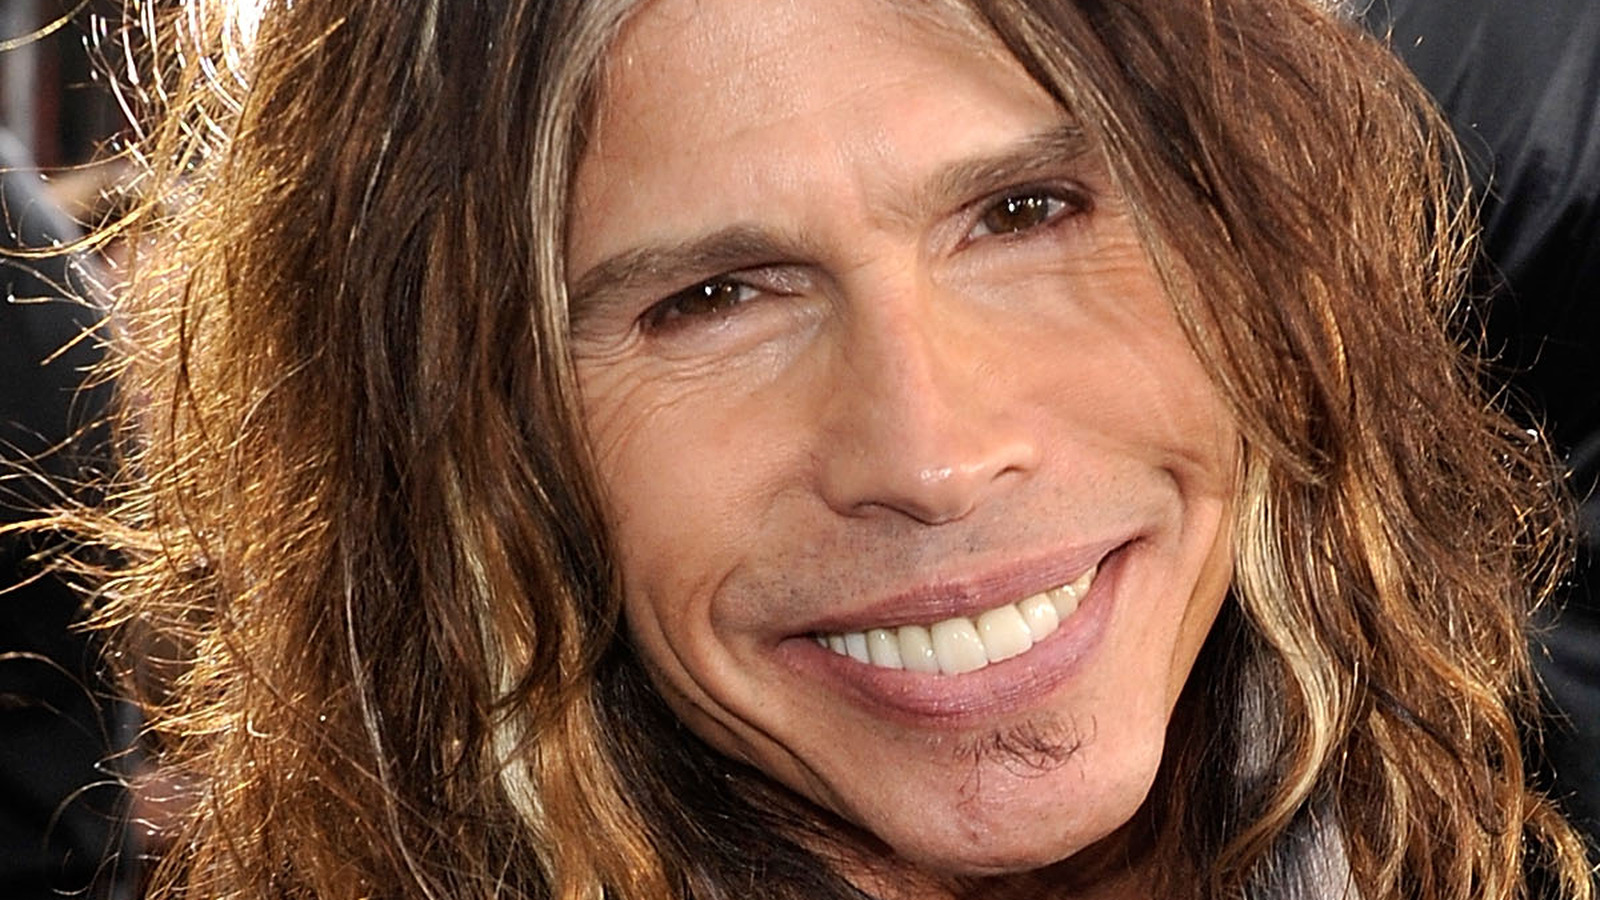 Steven Tyler's Transformation Is Turning Heads.